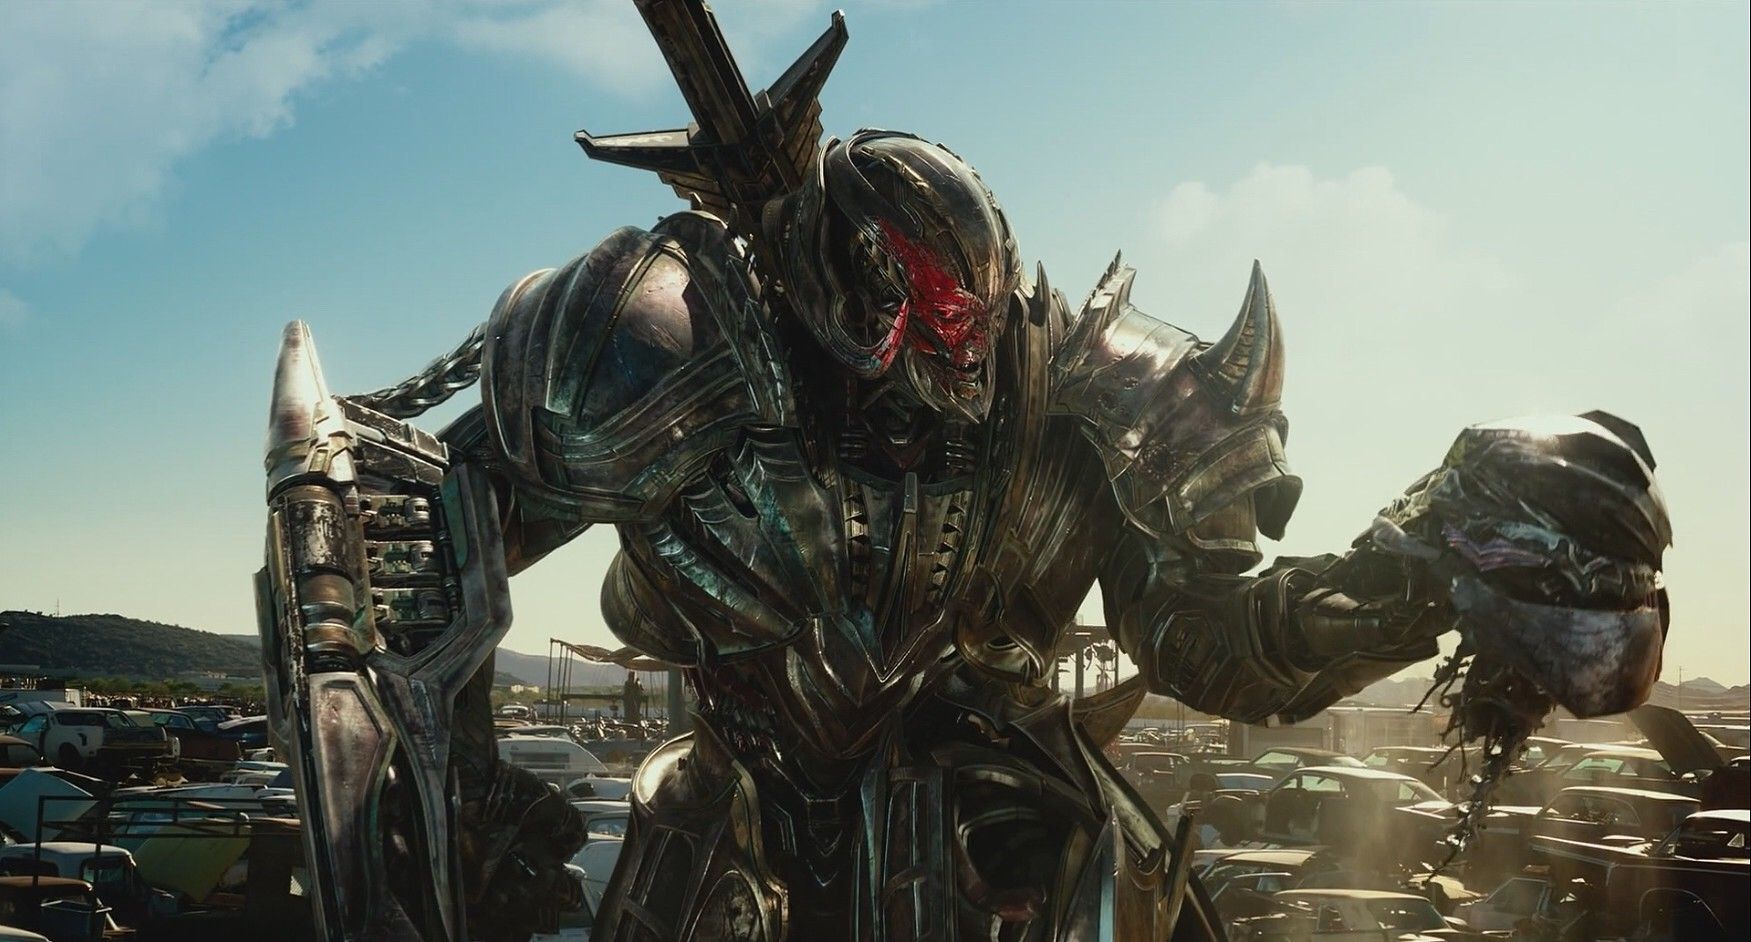 Christopher Lee Zammit for Transformers: The Last Knight